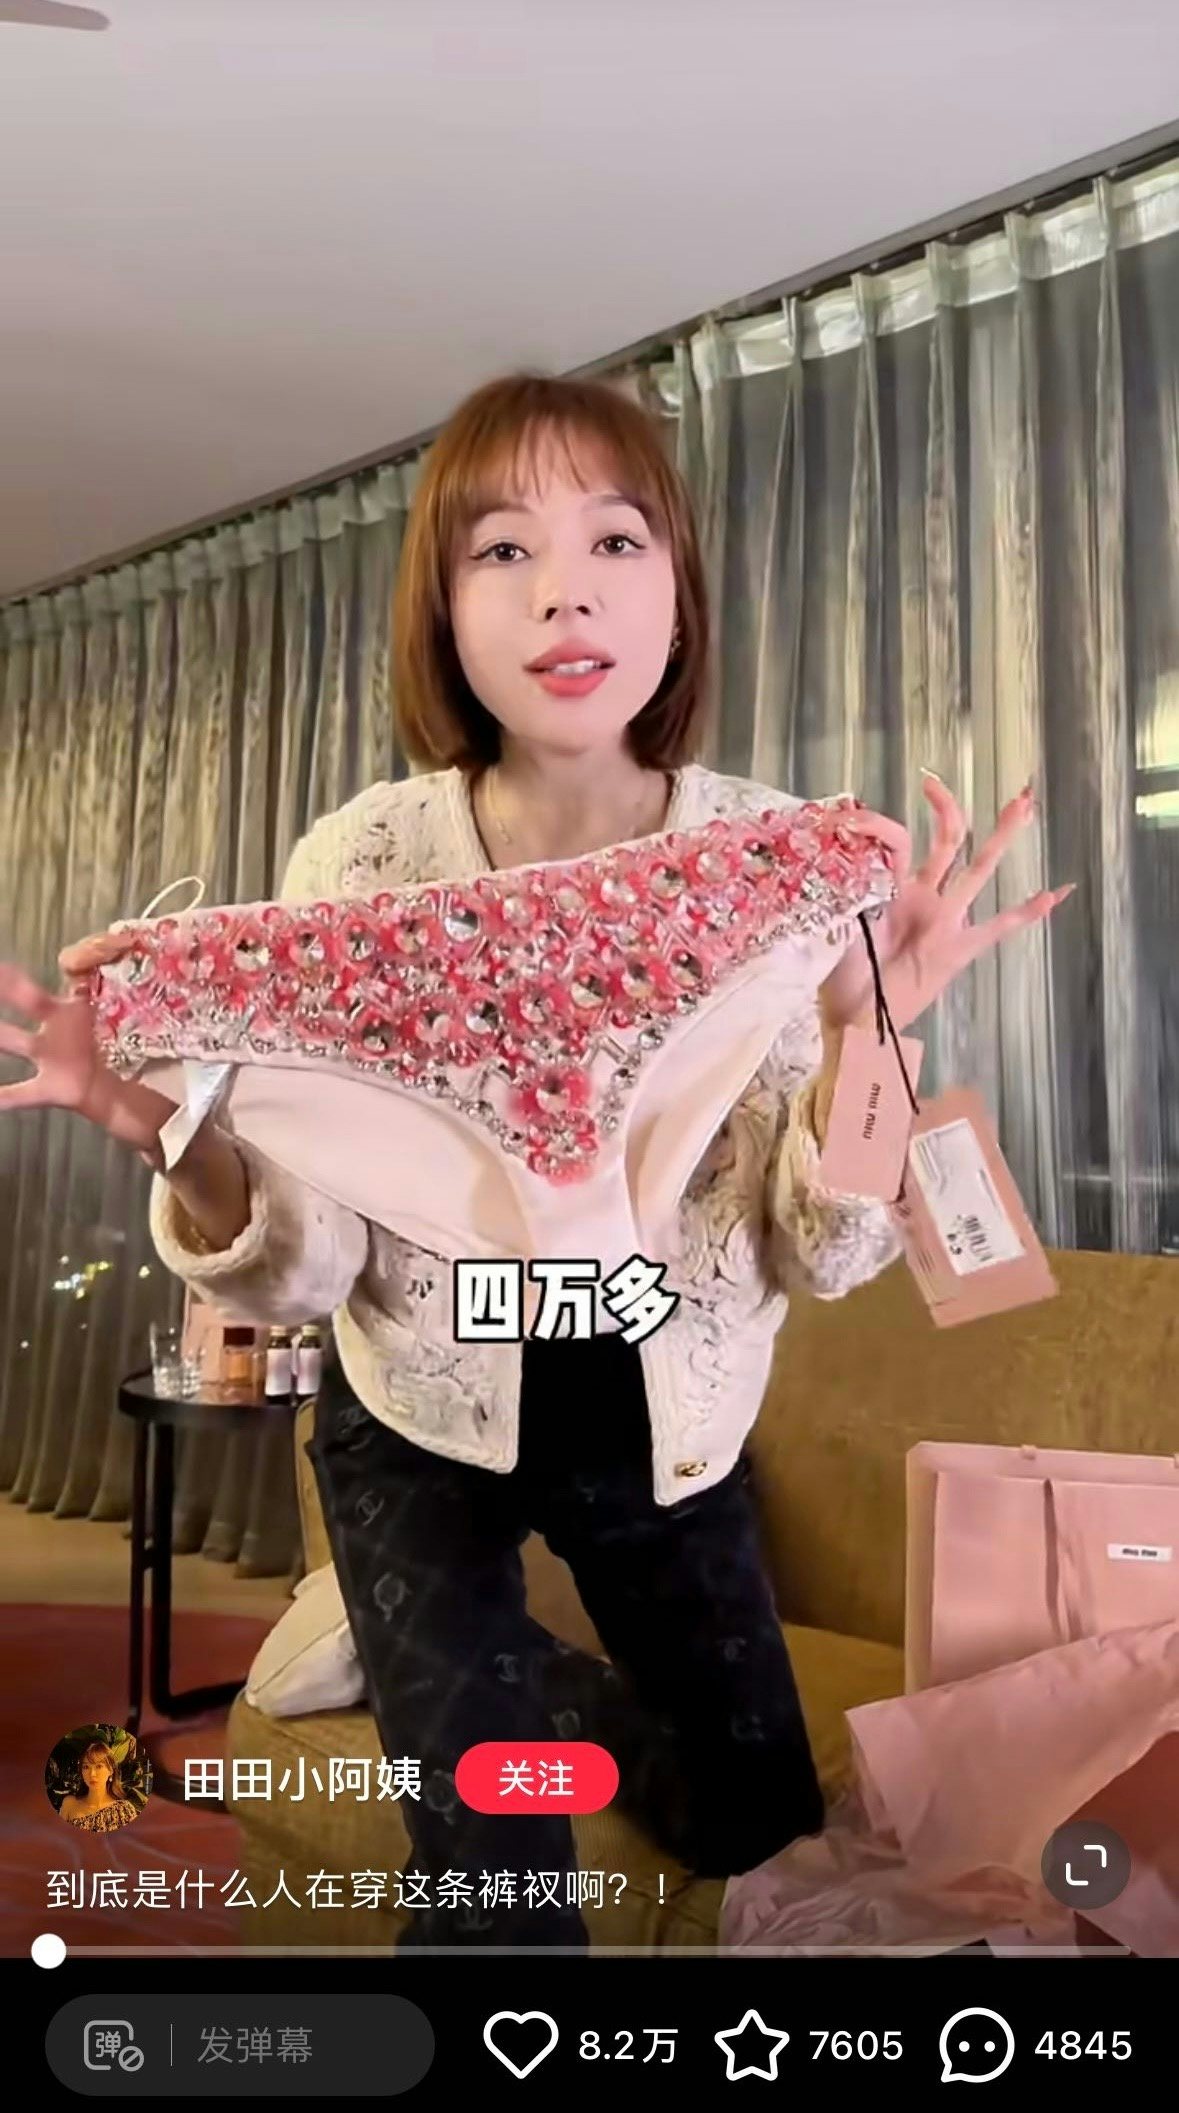 The brand's “itchy” crystal panties caused a stir online following KOL Tiantian’s viral video. Photo: Xiaohongshu
